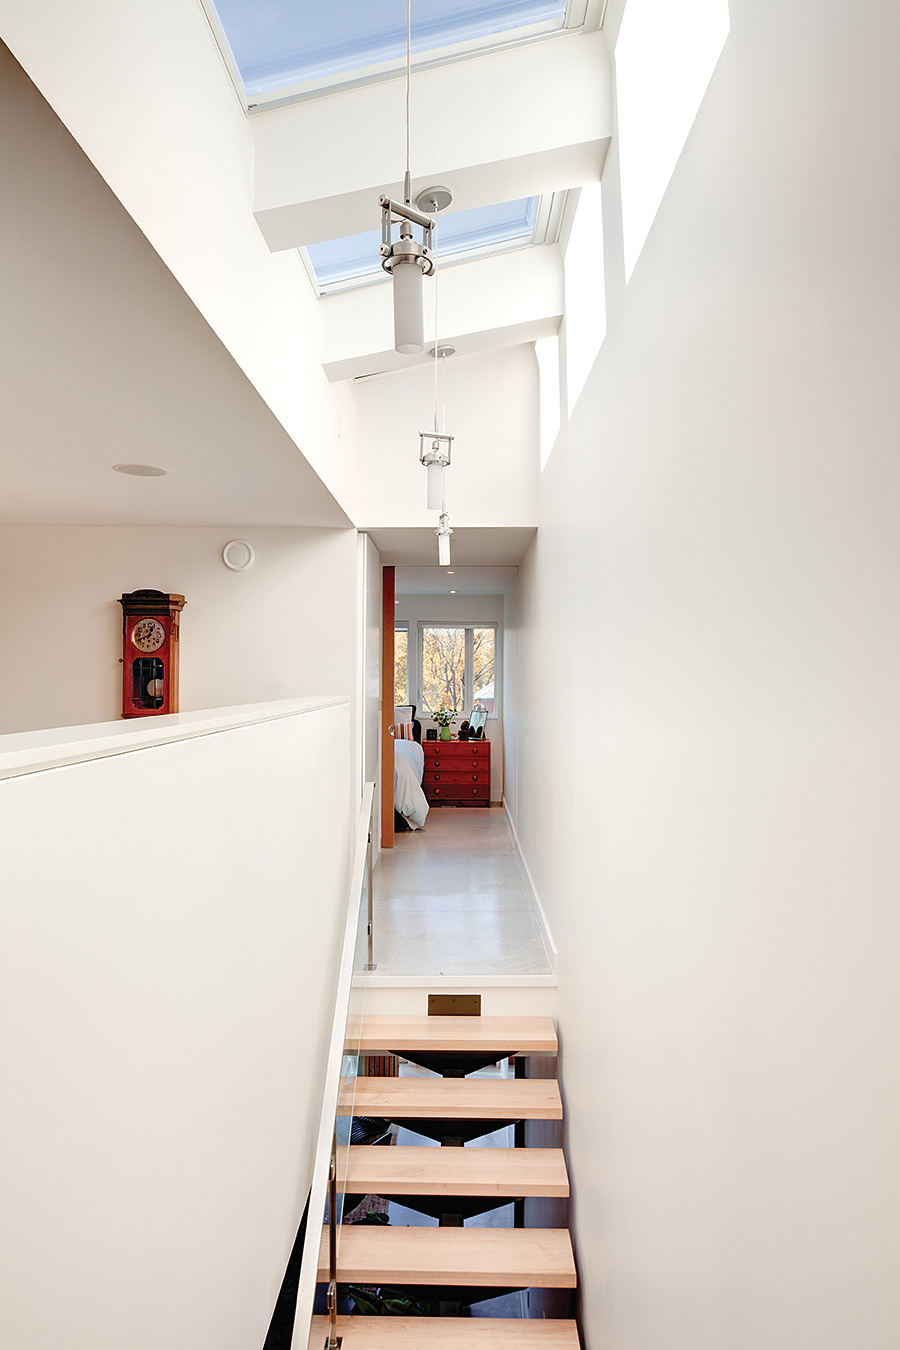 The stairwell is lit by three remote-controlled skylights by Inline Windows. Boomerang pendants from Sistemalux.